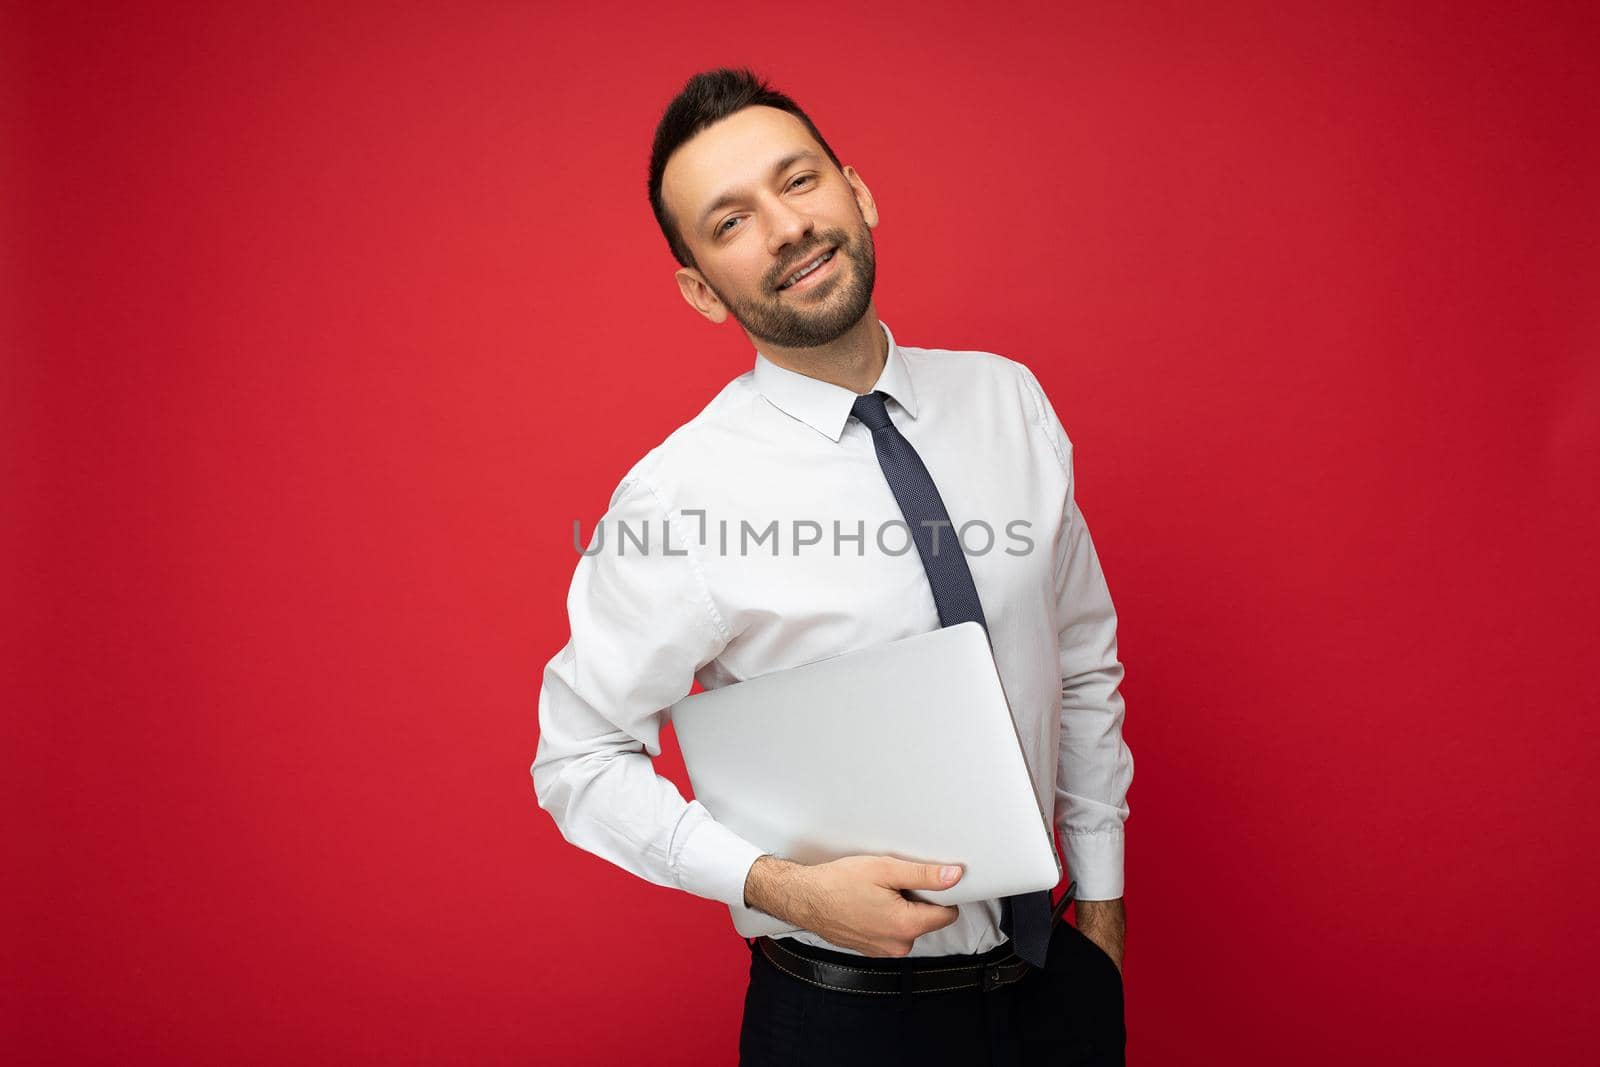 Handsome smiling brunet man holding laptop computer looking at camera in white shirt and tie on isolated red background.